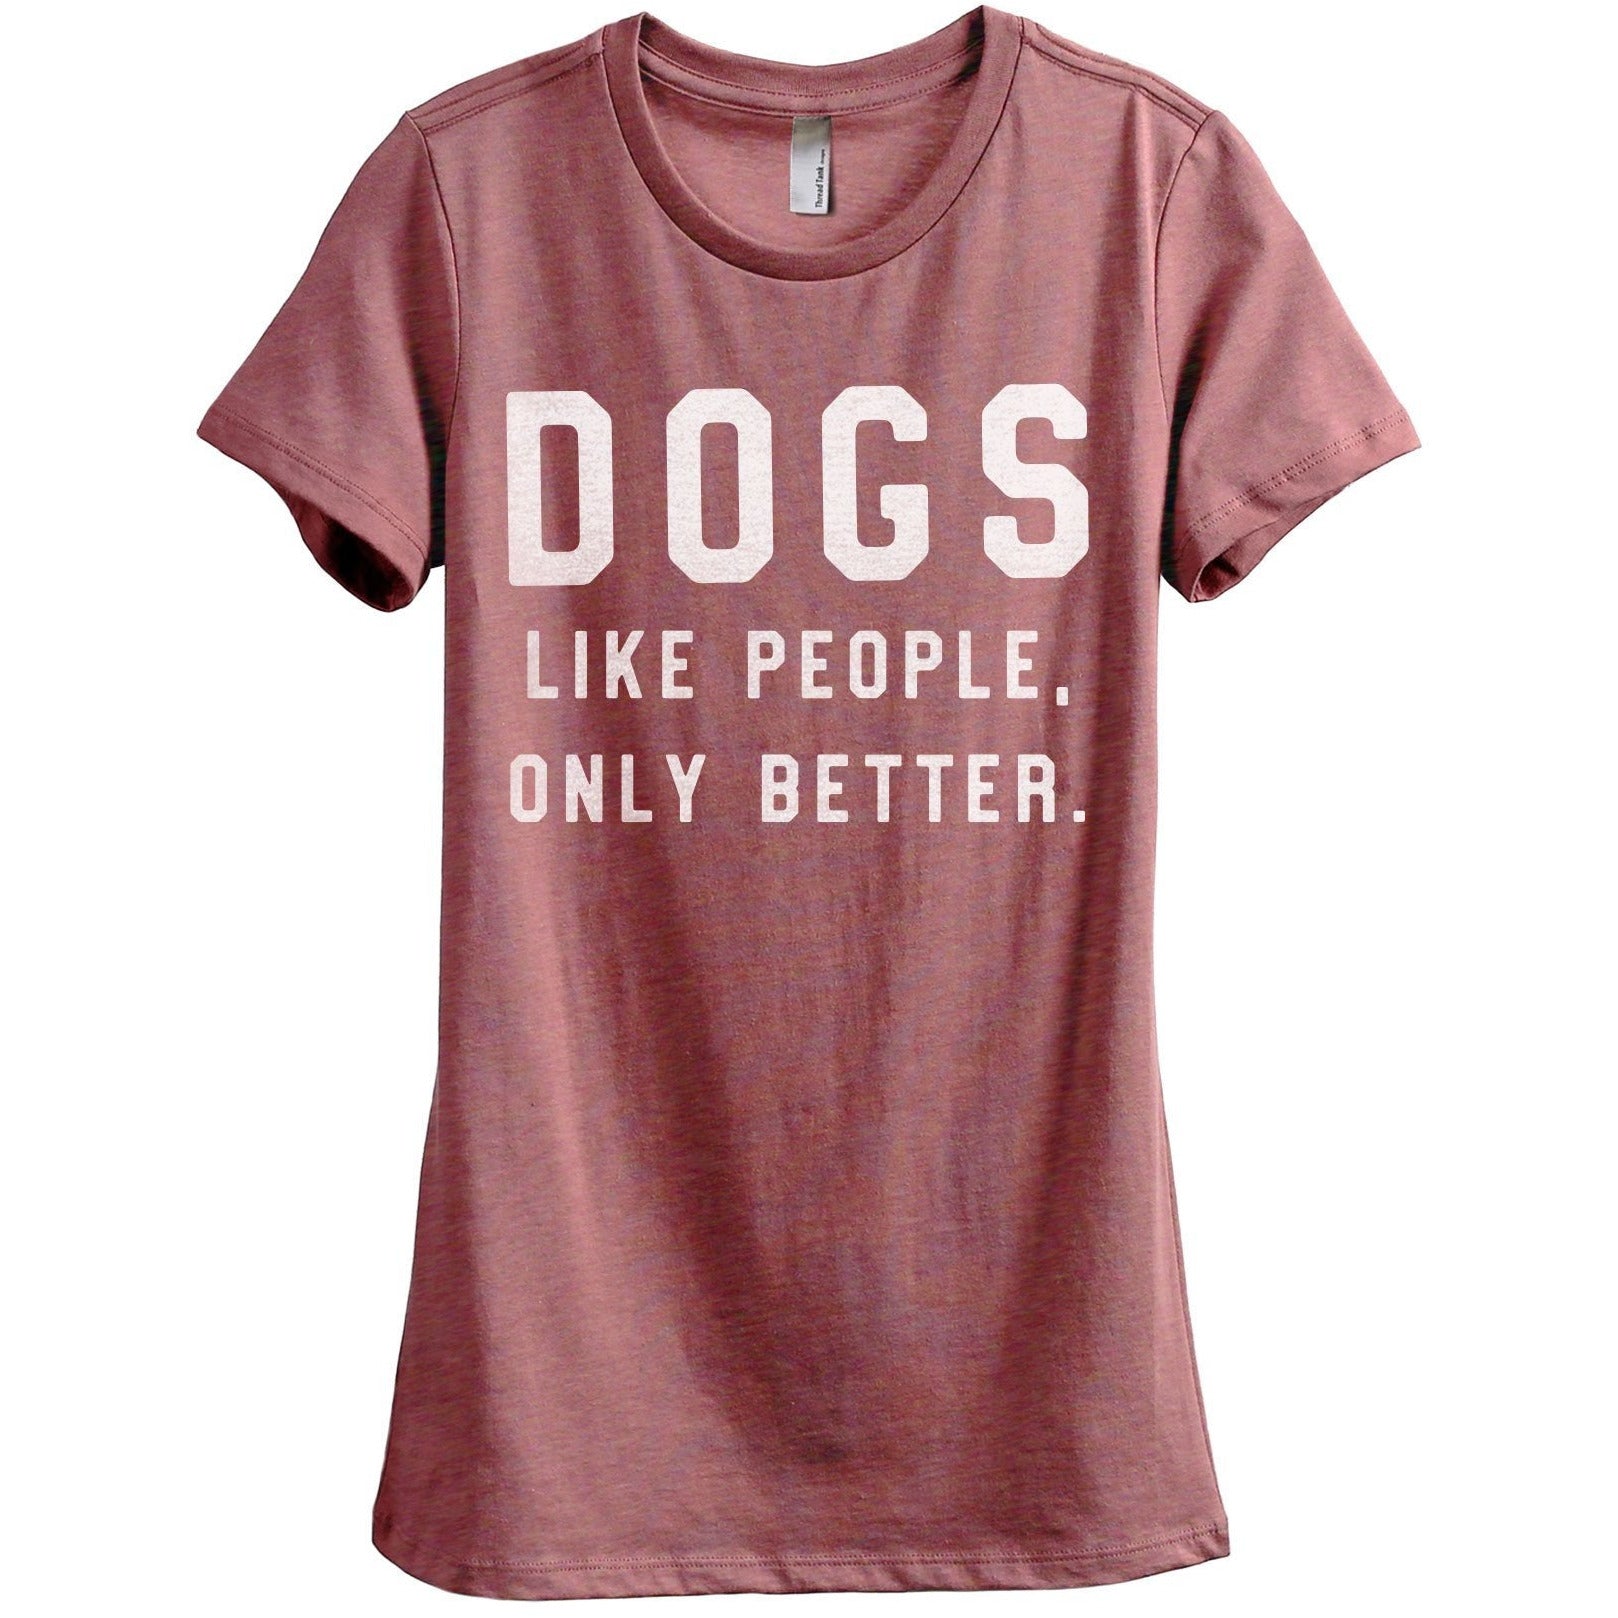 Dogs Like People Only Better Women's Relaxed Crewneck T-Shirt Top Tee Heather Rouge